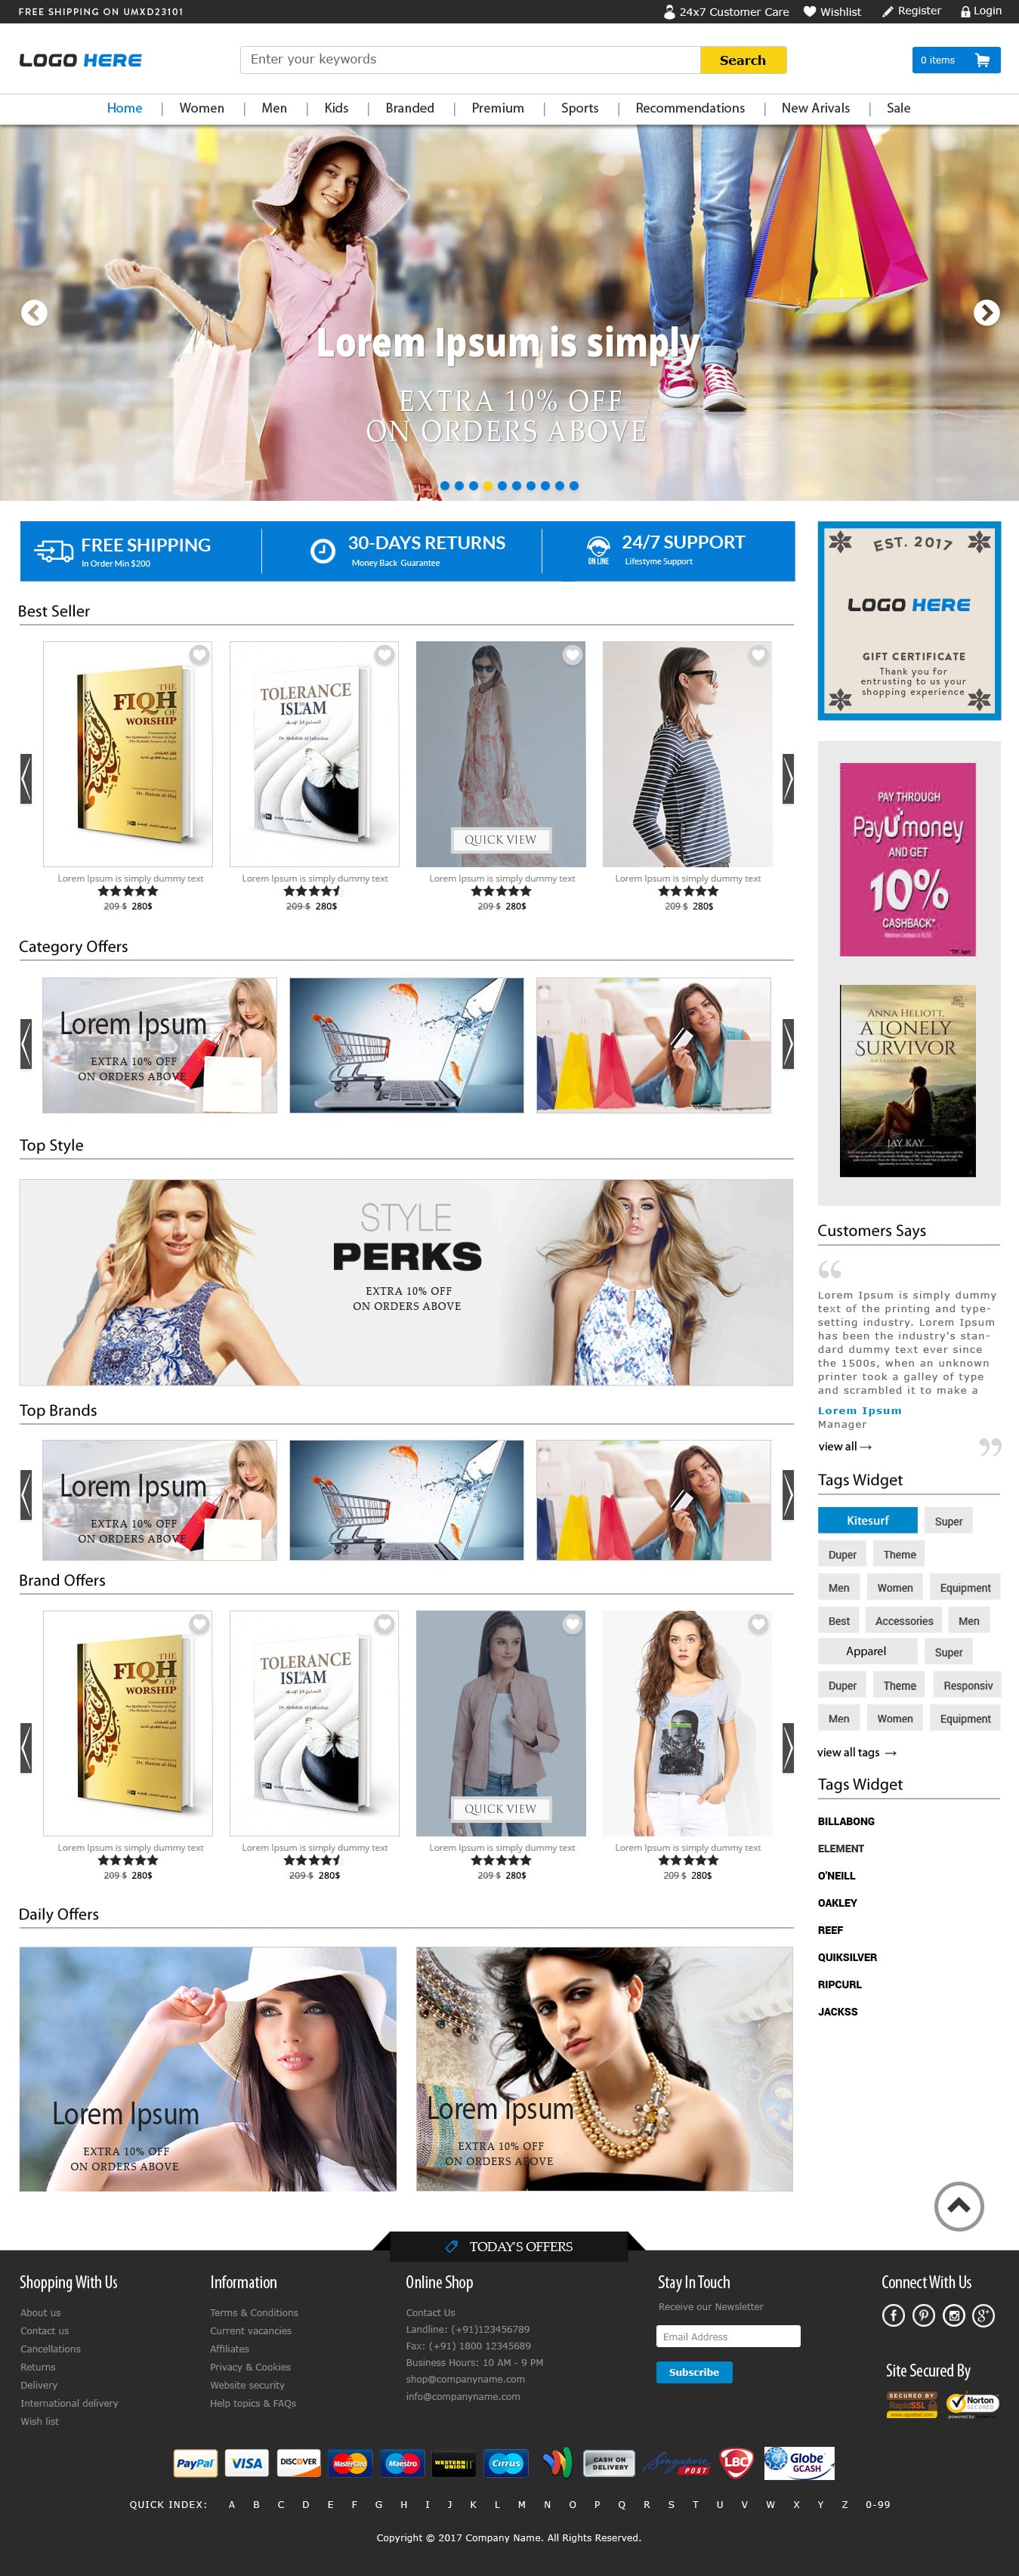 Full Width Ecommerce Website Templates Free Psd Download